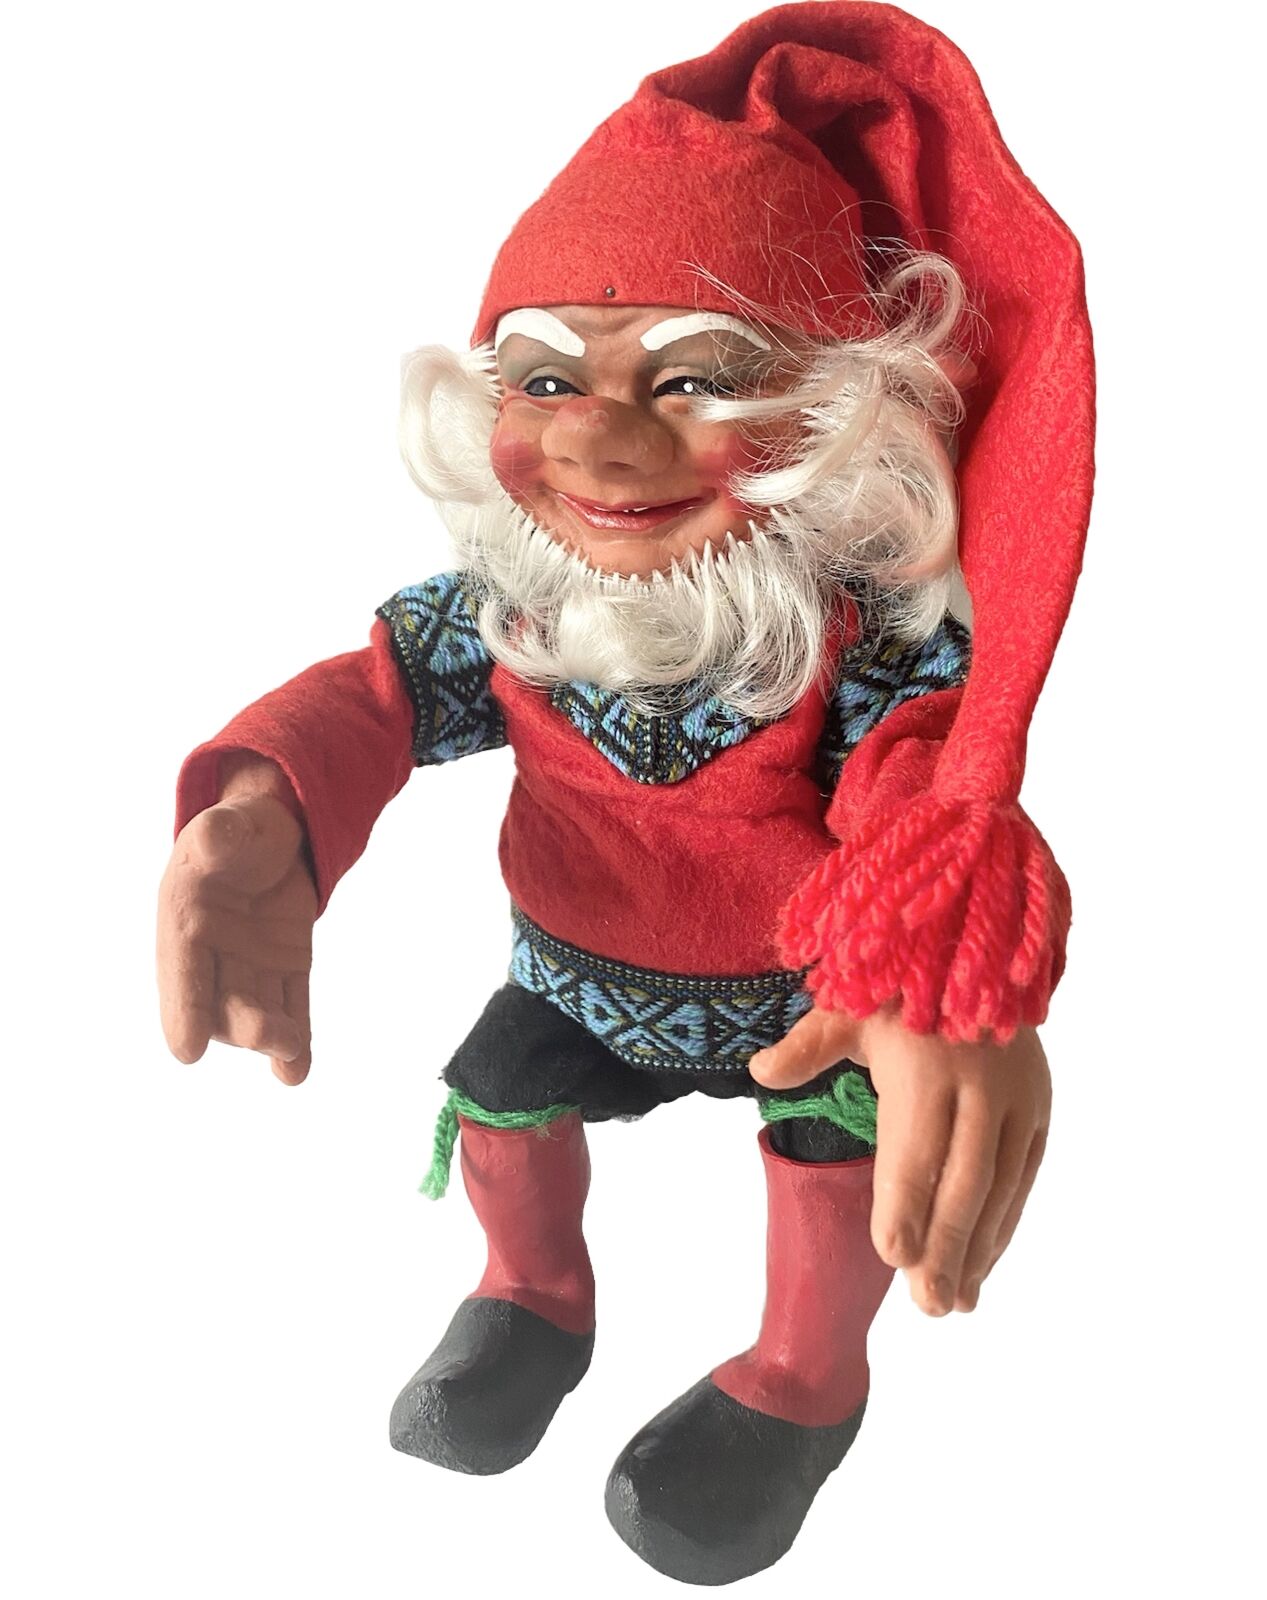 Vintage Arne Hasle St Claus NIsse Elf Norway Christmas Rubber Troll Gnome Norge